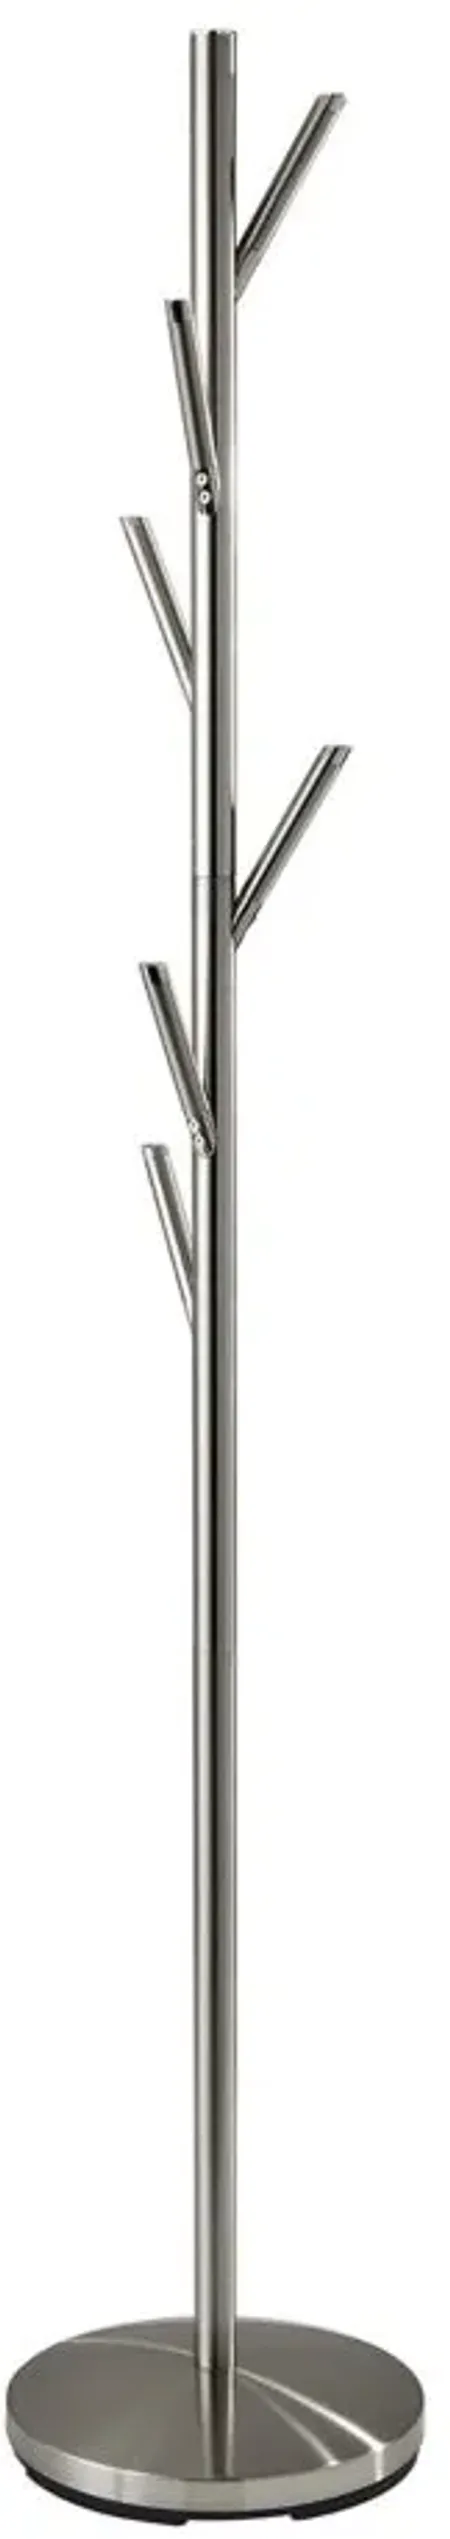 Evergreen Coat Rack in Brushed Steel by Adesso Inc